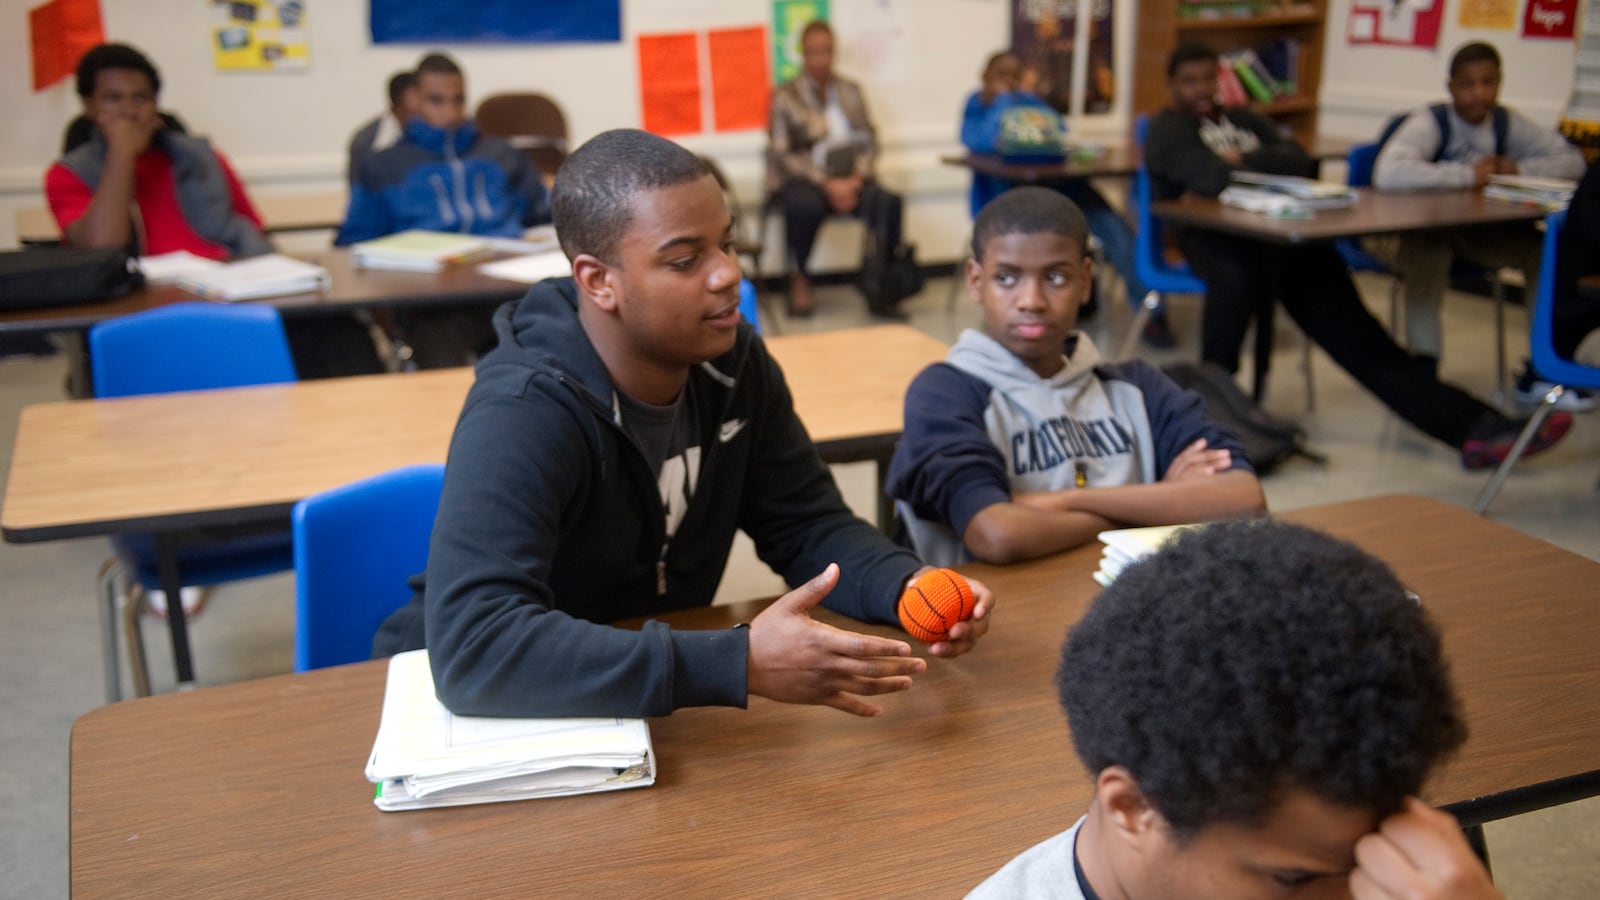 Oakland High School 10th grader, Barry Williams, answers a question from instructor Tiago Robinson during the Manhood Development Program, which is part of the district's African-American Male Achievement initiative. (Photo by Ann Hermes/The Christian Science Monitor via Getty Images)